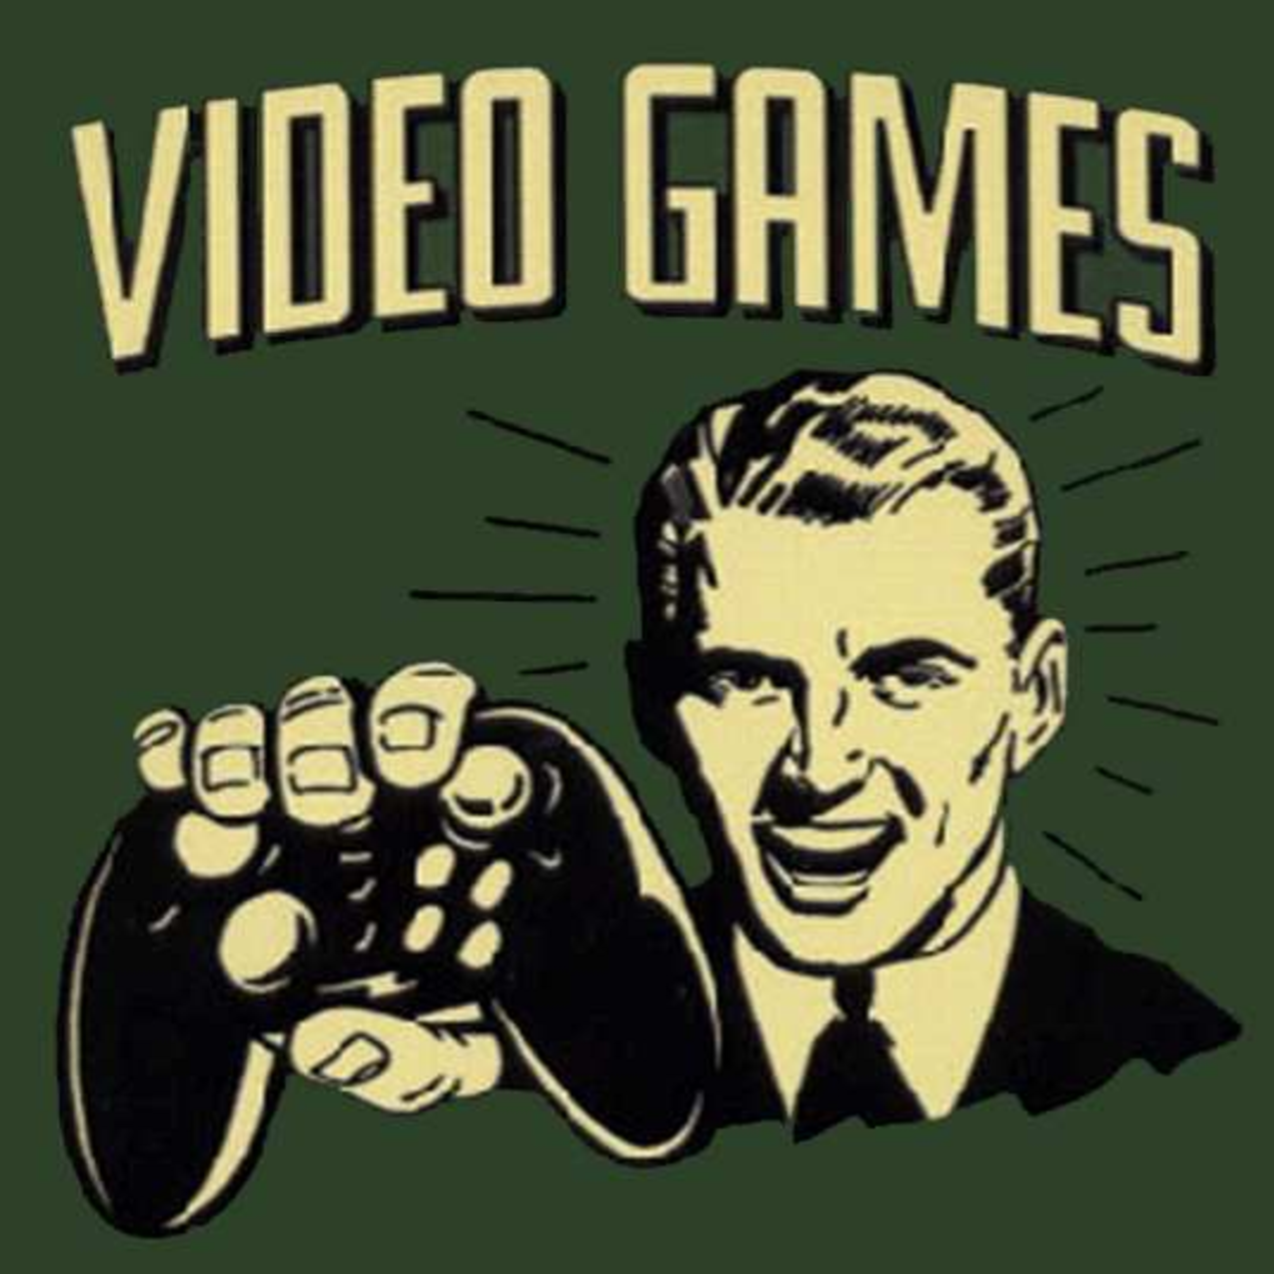 psychology of video games